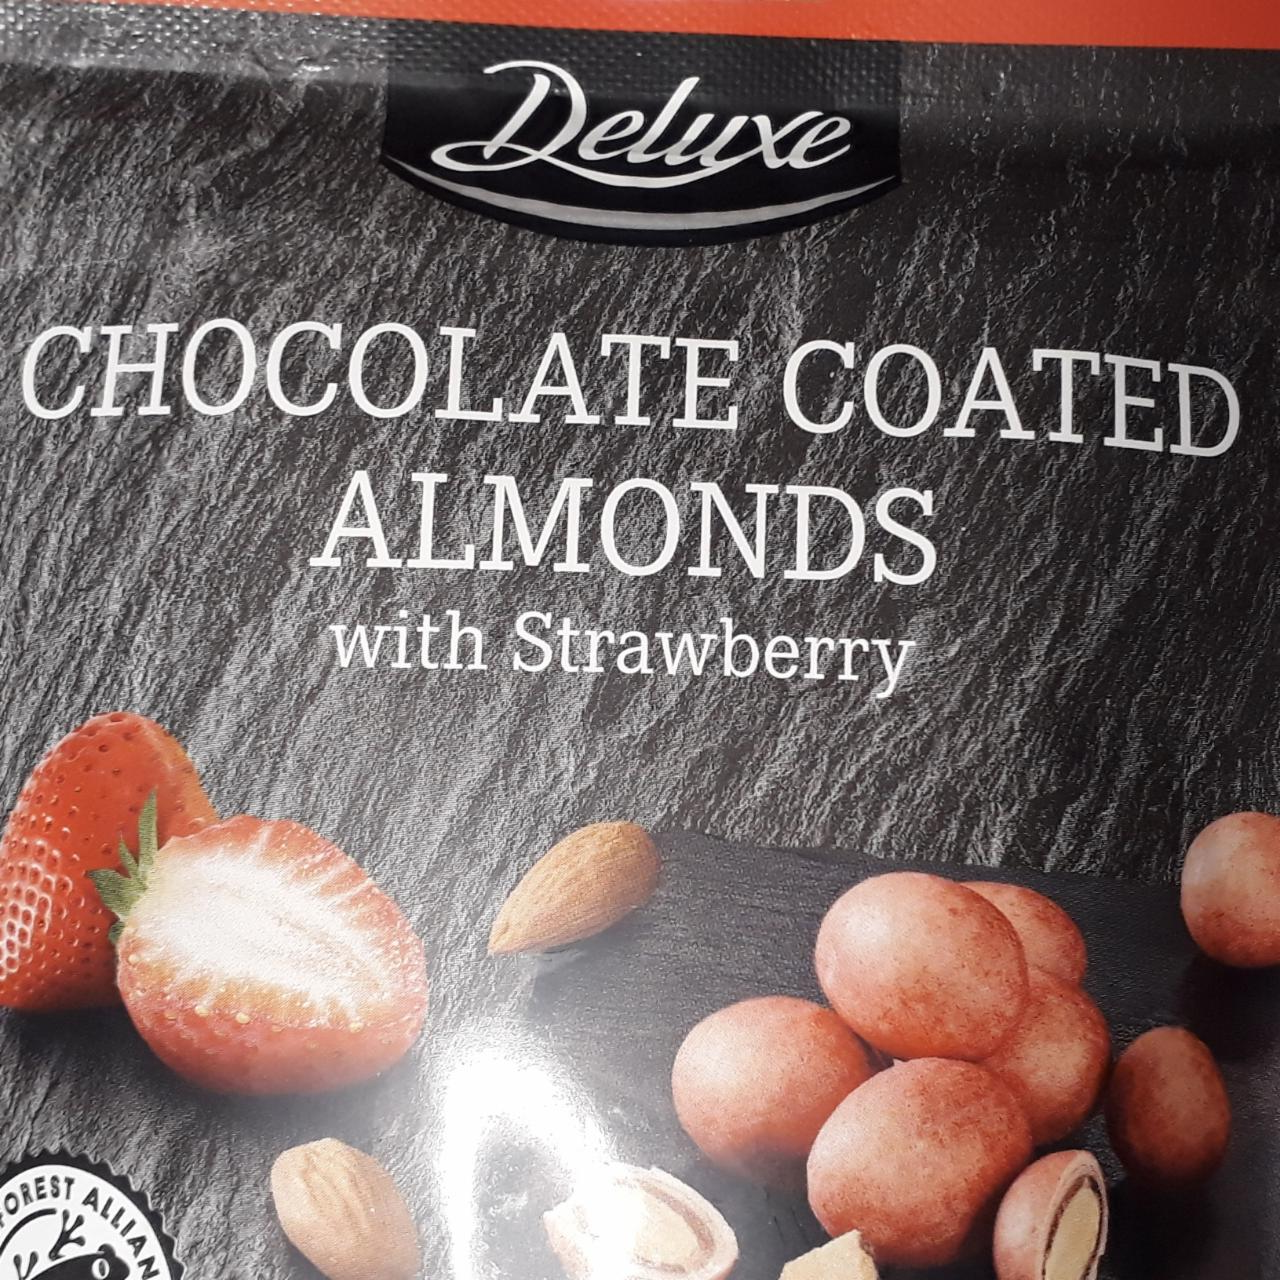 Fotografie - Chocolate coated almonds with strawberry Deluxe